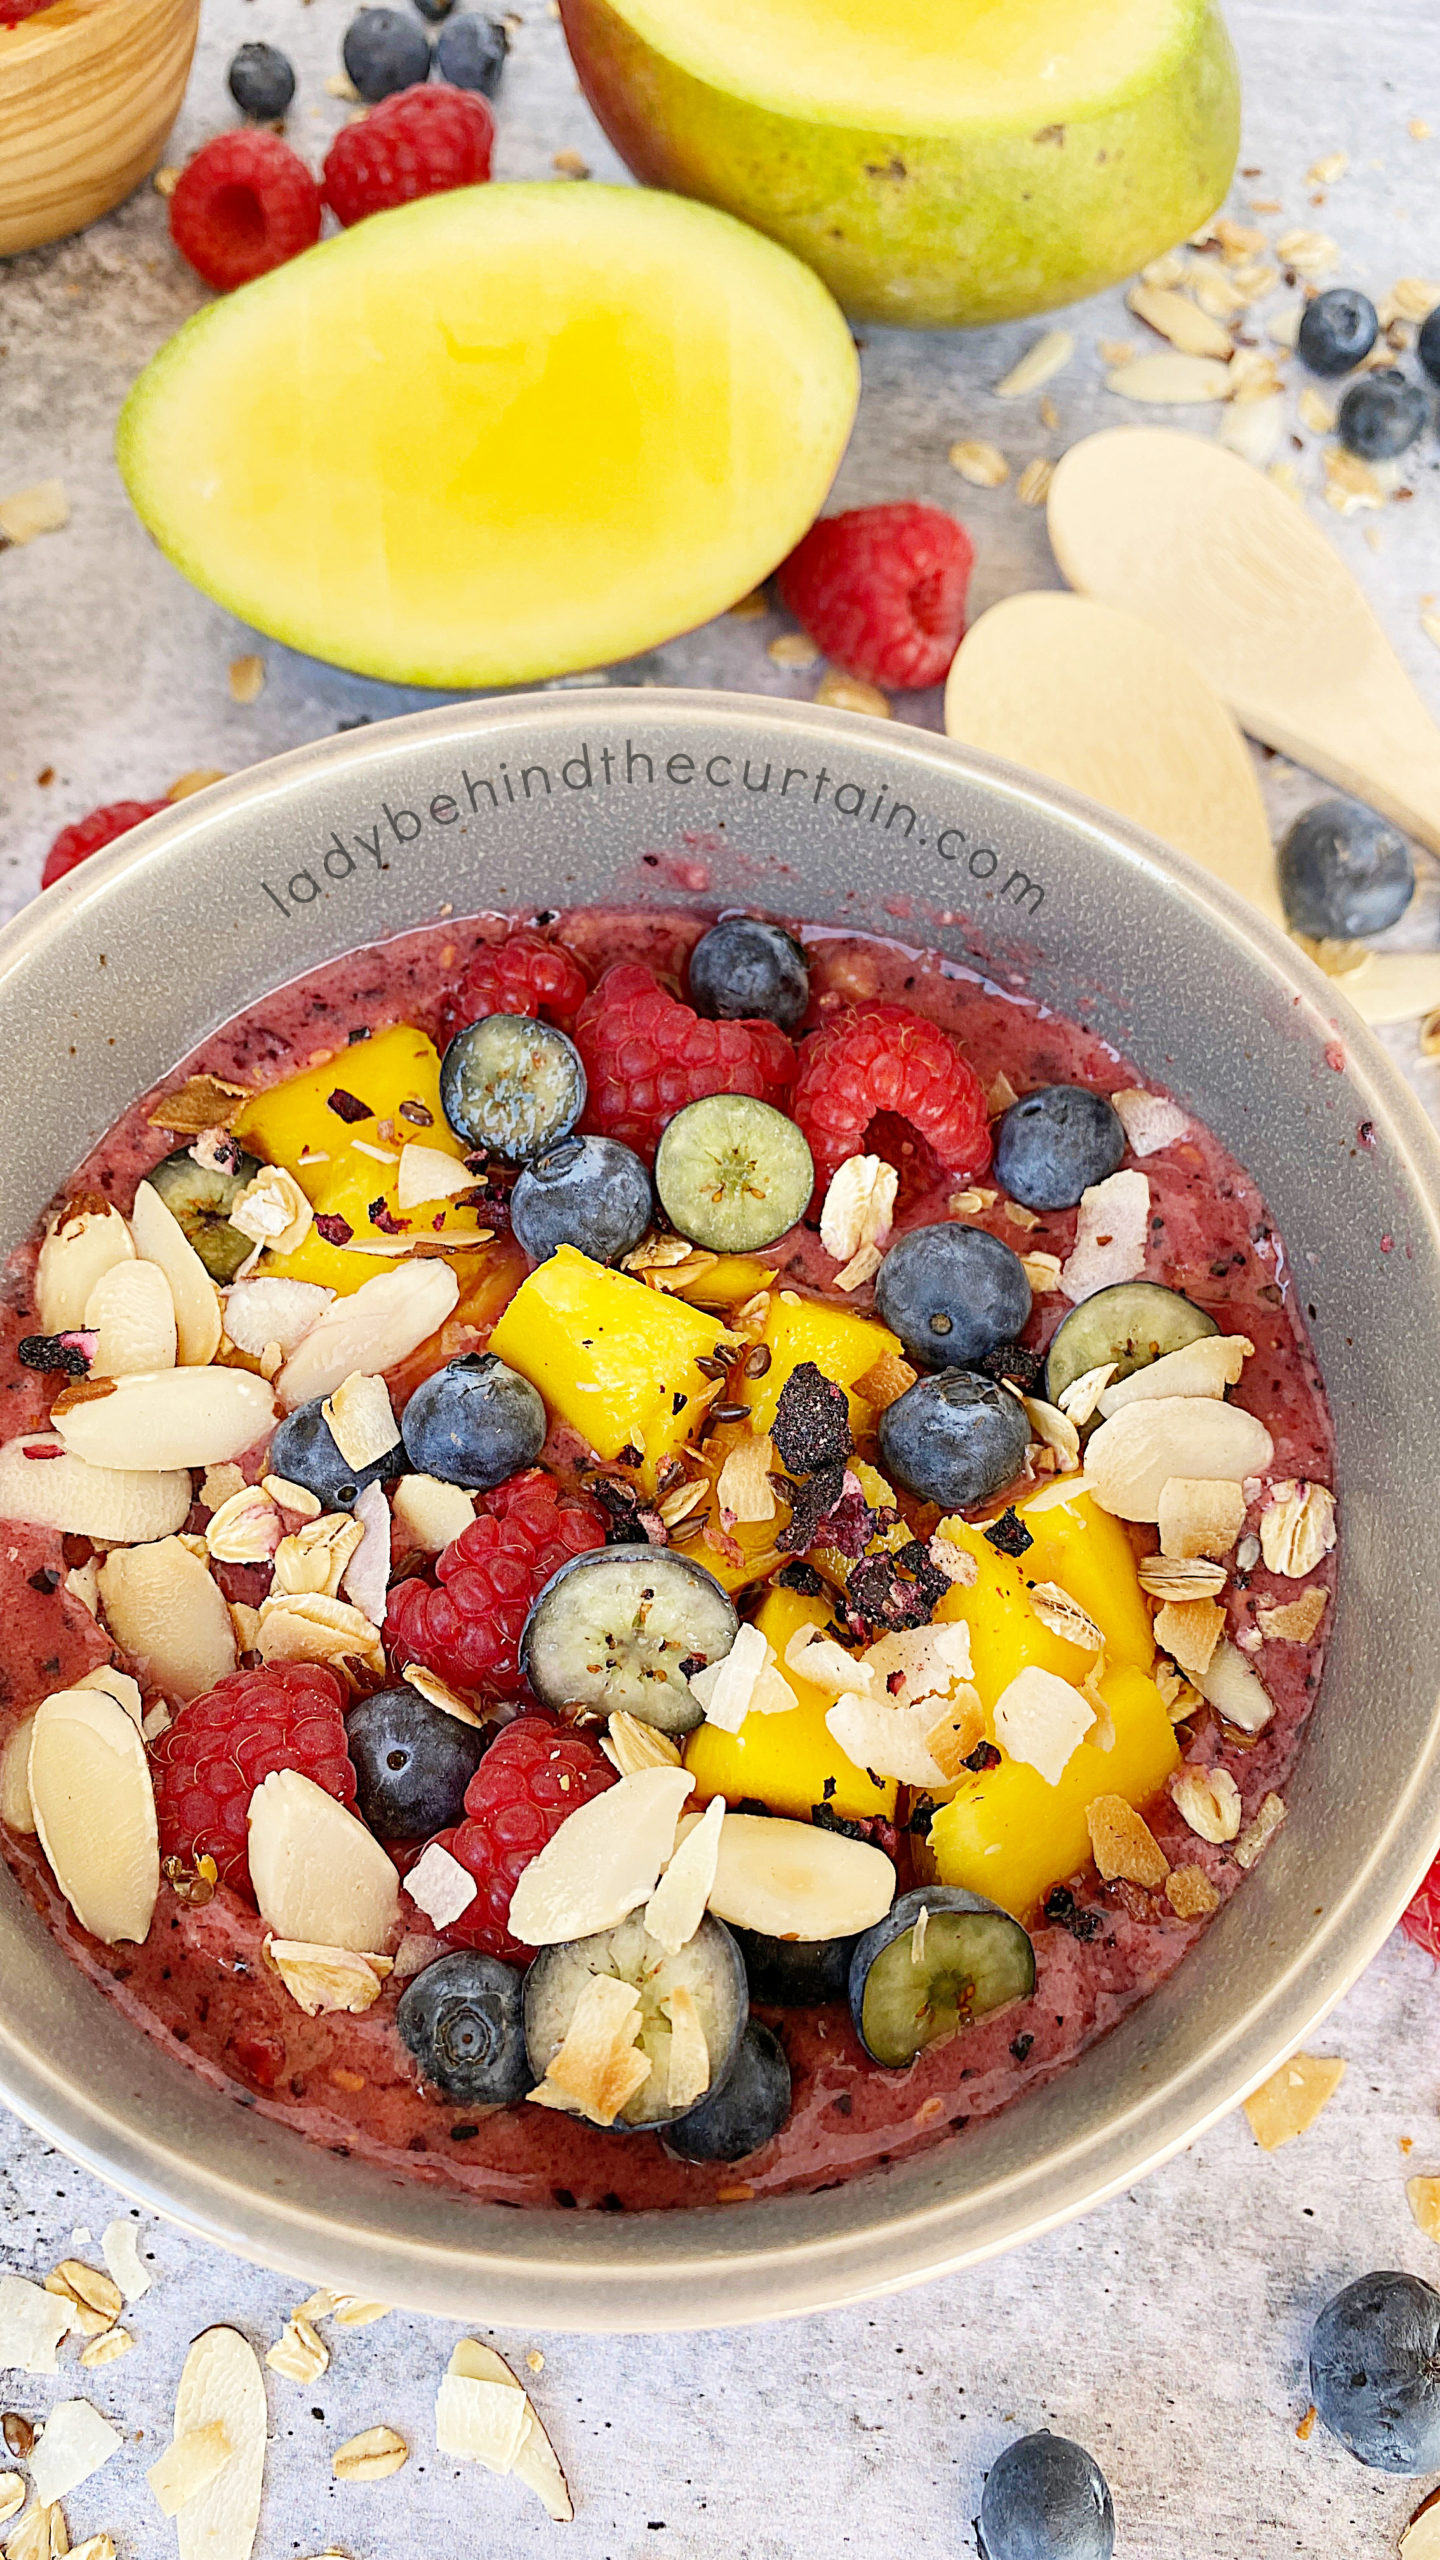 https://www.ladybehindthecurtain.com/wp-content/uploads/2022/07/Tropical-Smoothie-Bowl-with-Toasted-Topping-5-scaled.jpg